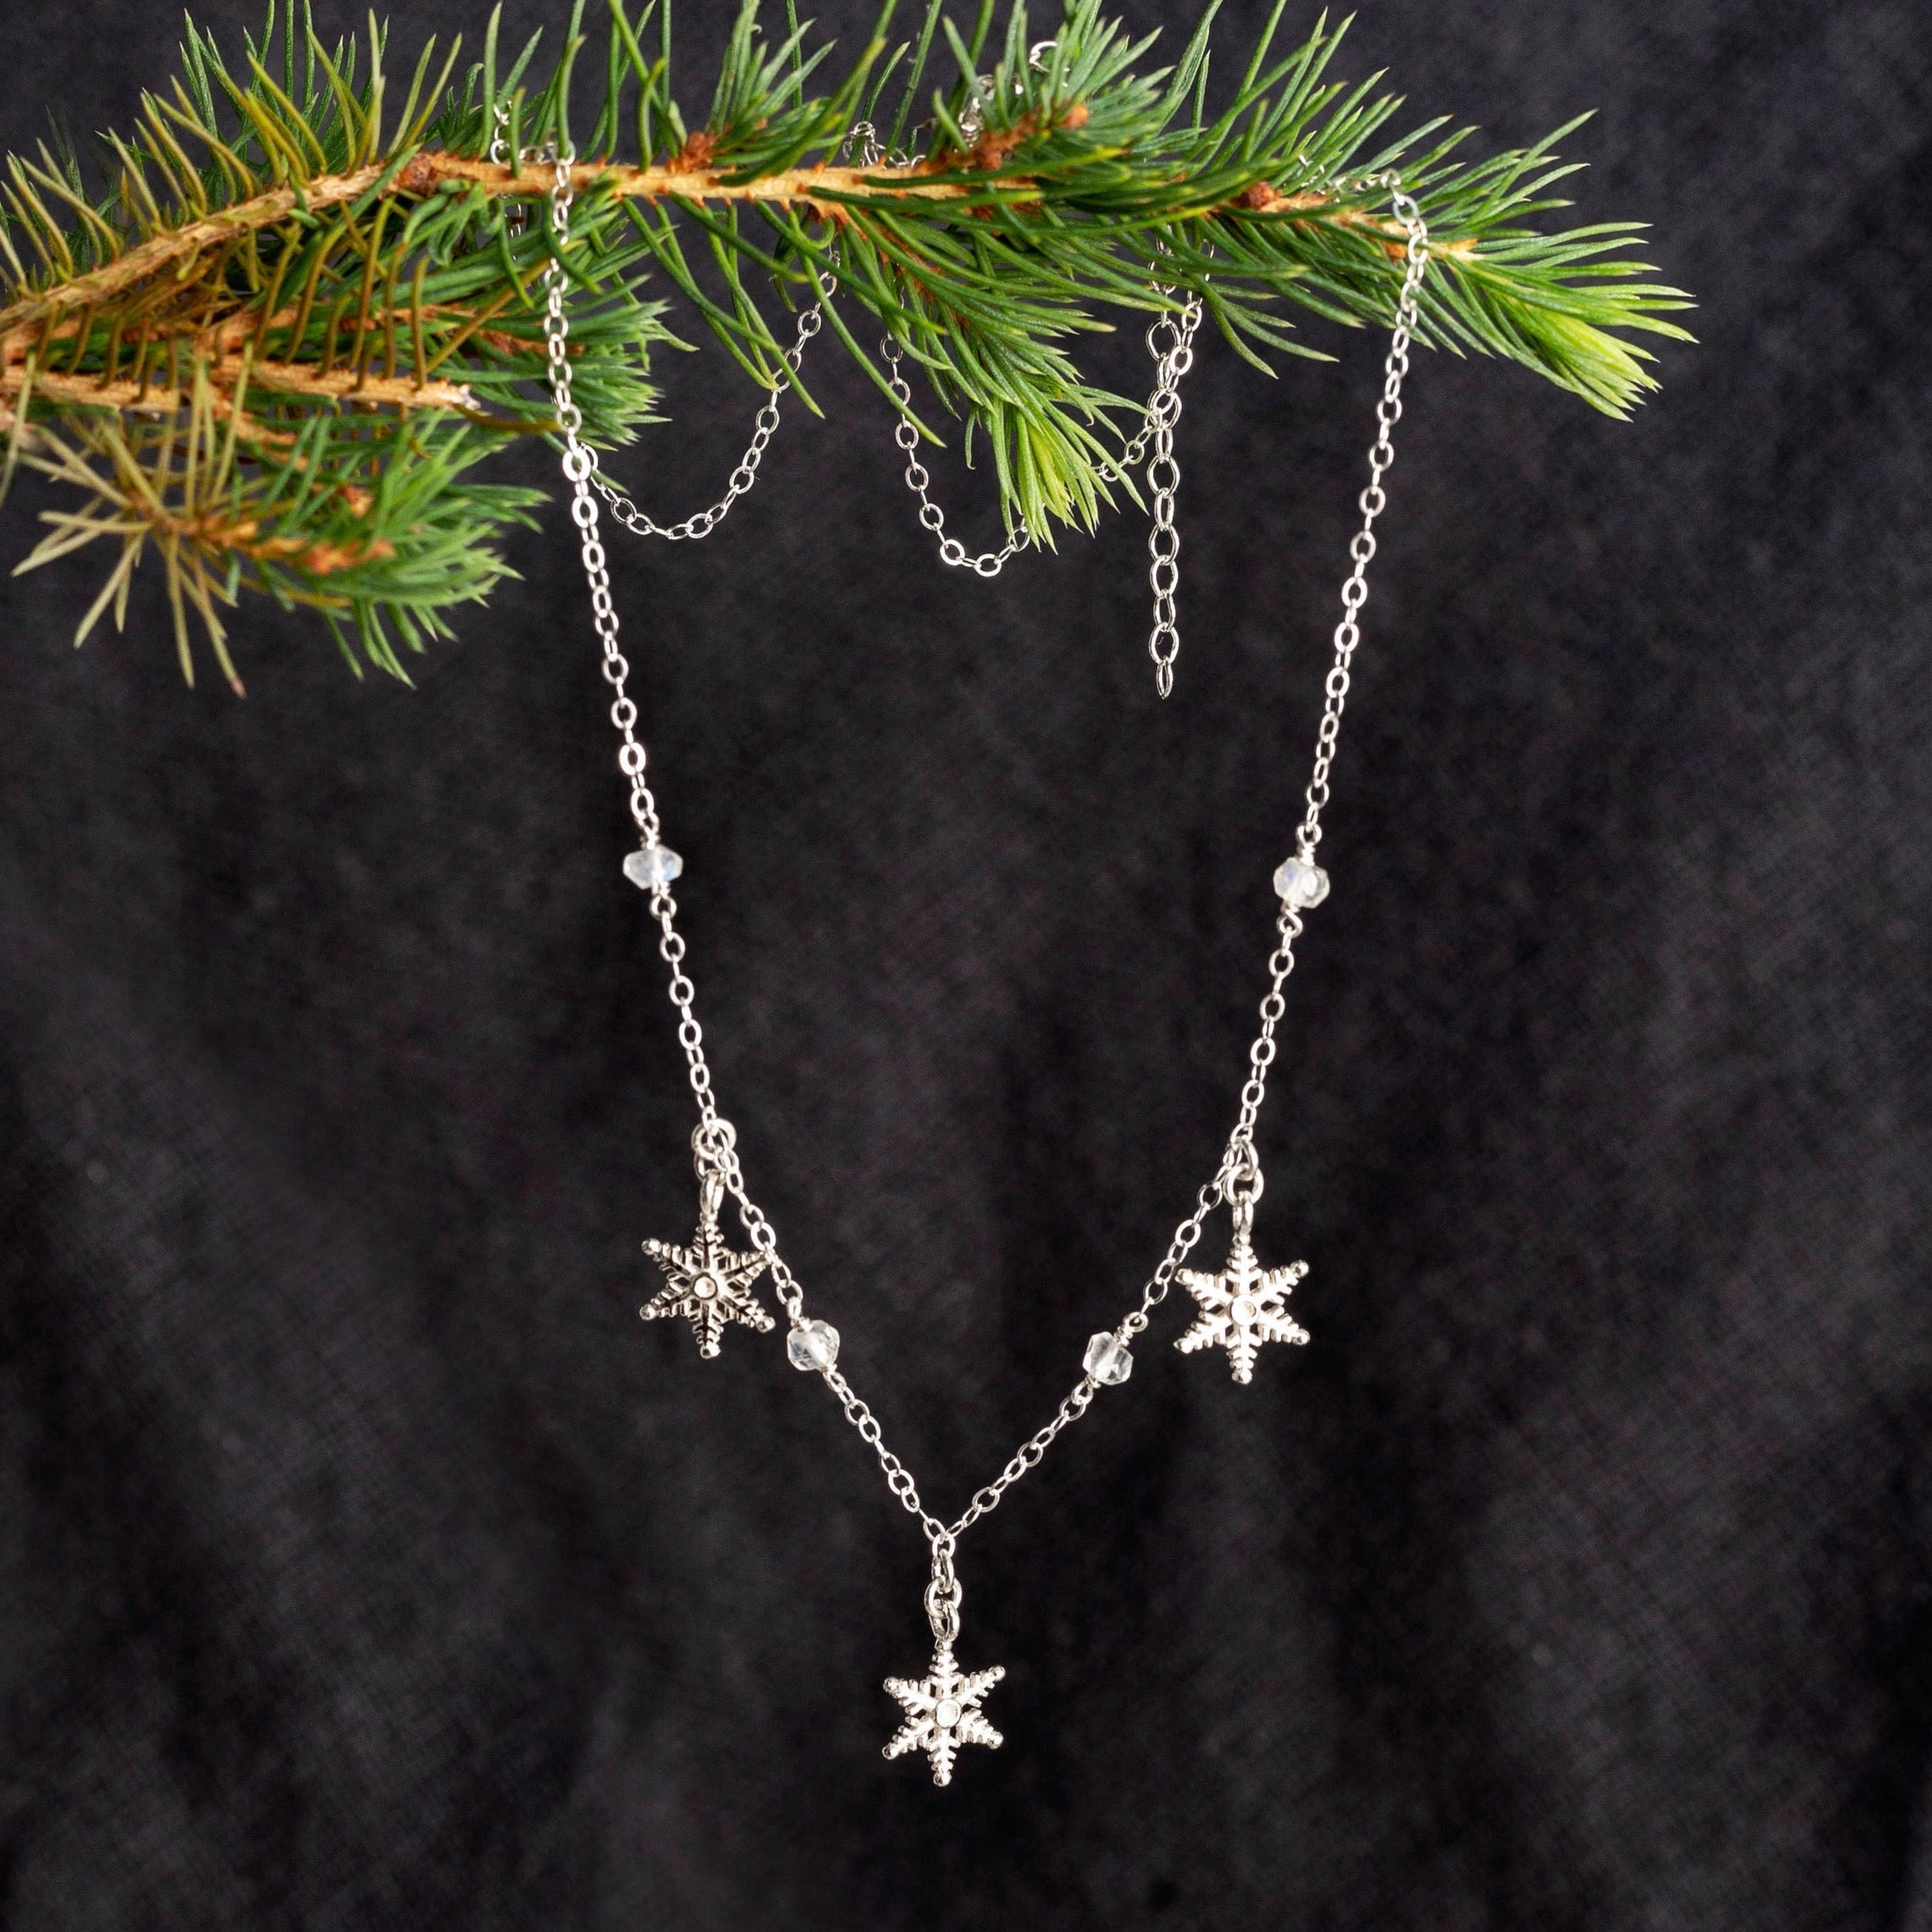 Snowflake necklace – TED&MAG JEWELRY STUDIO